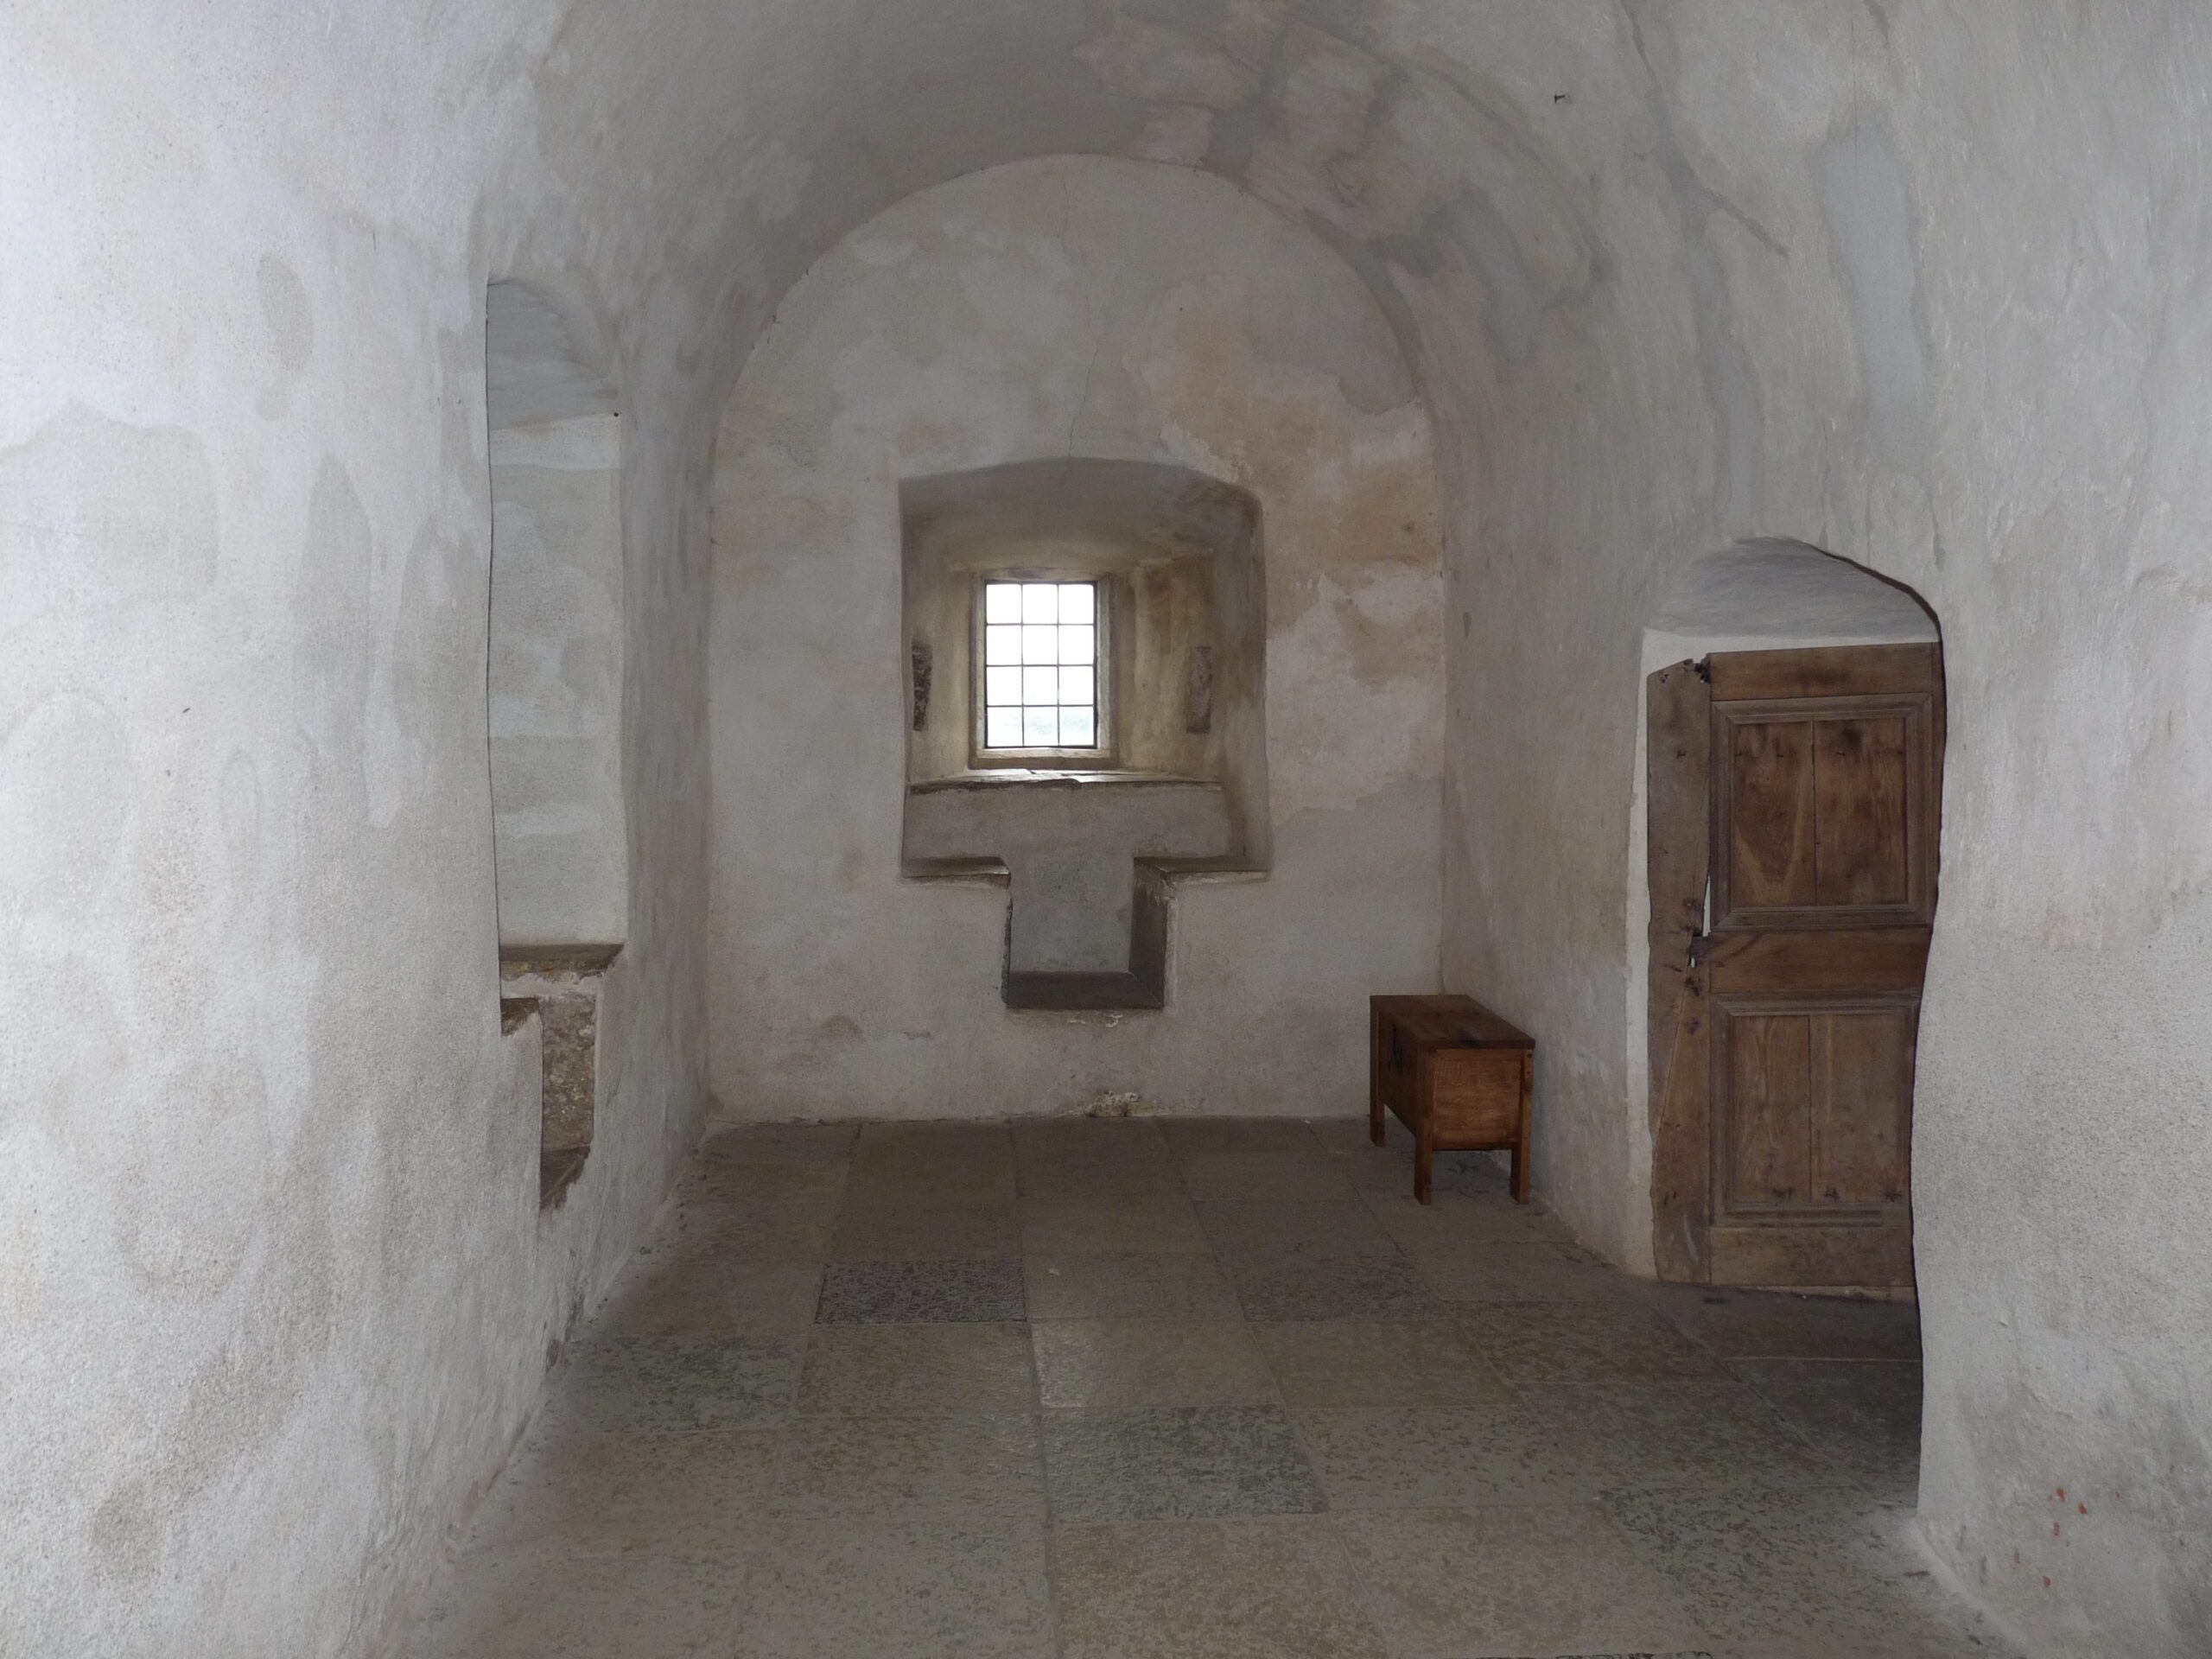 Here you can see the manor house's barrel vault and window niche with a seat. To the right is a chest.